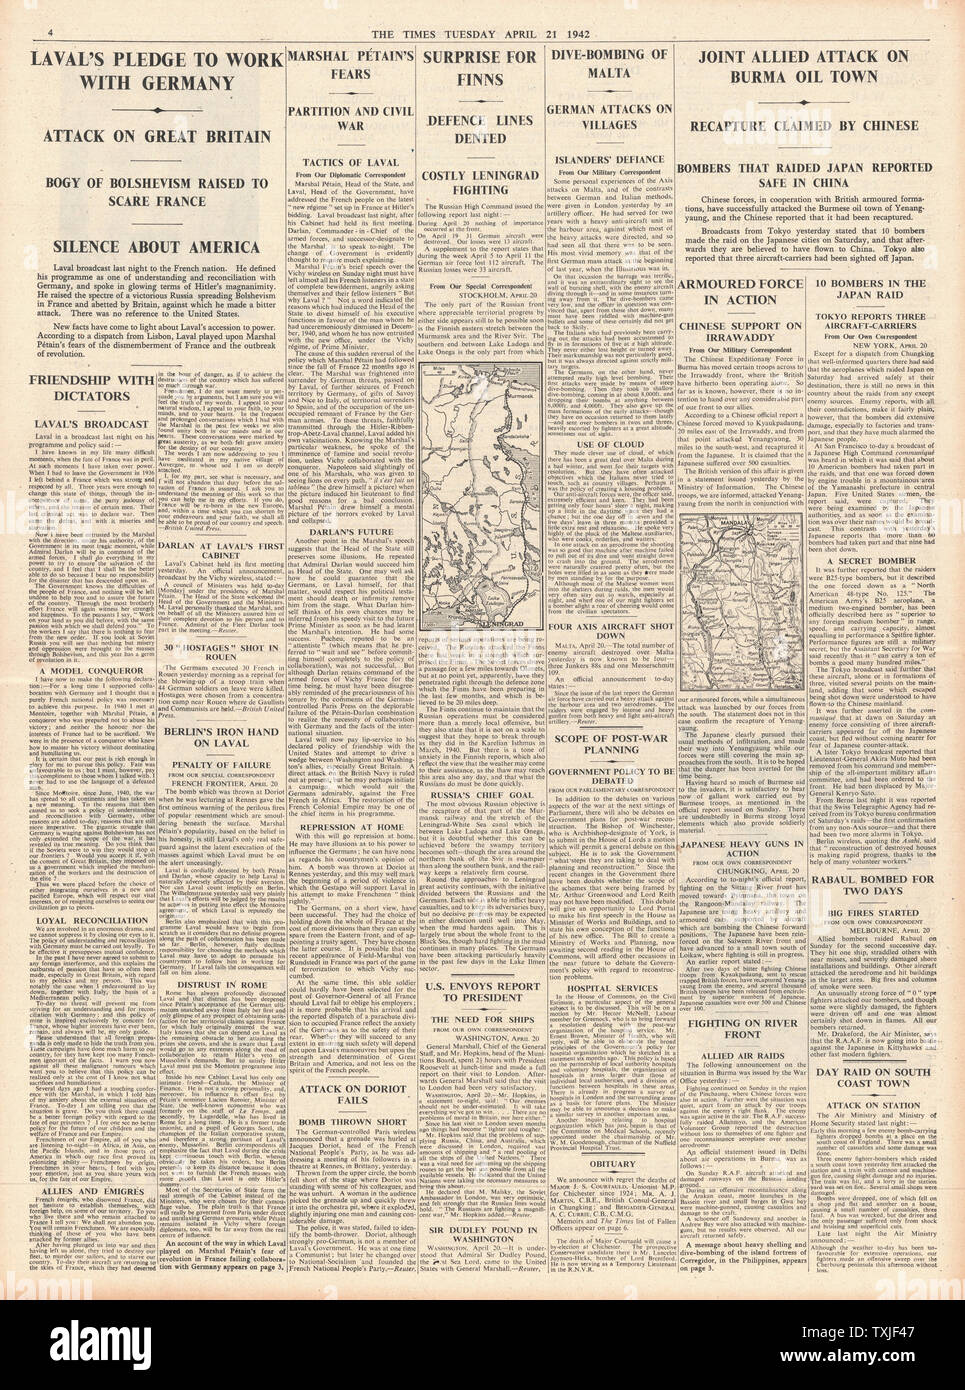 1942 page 4 The Times Pierre Laval says Britain is 'Enemy' and Battle for Burma Stock Photo